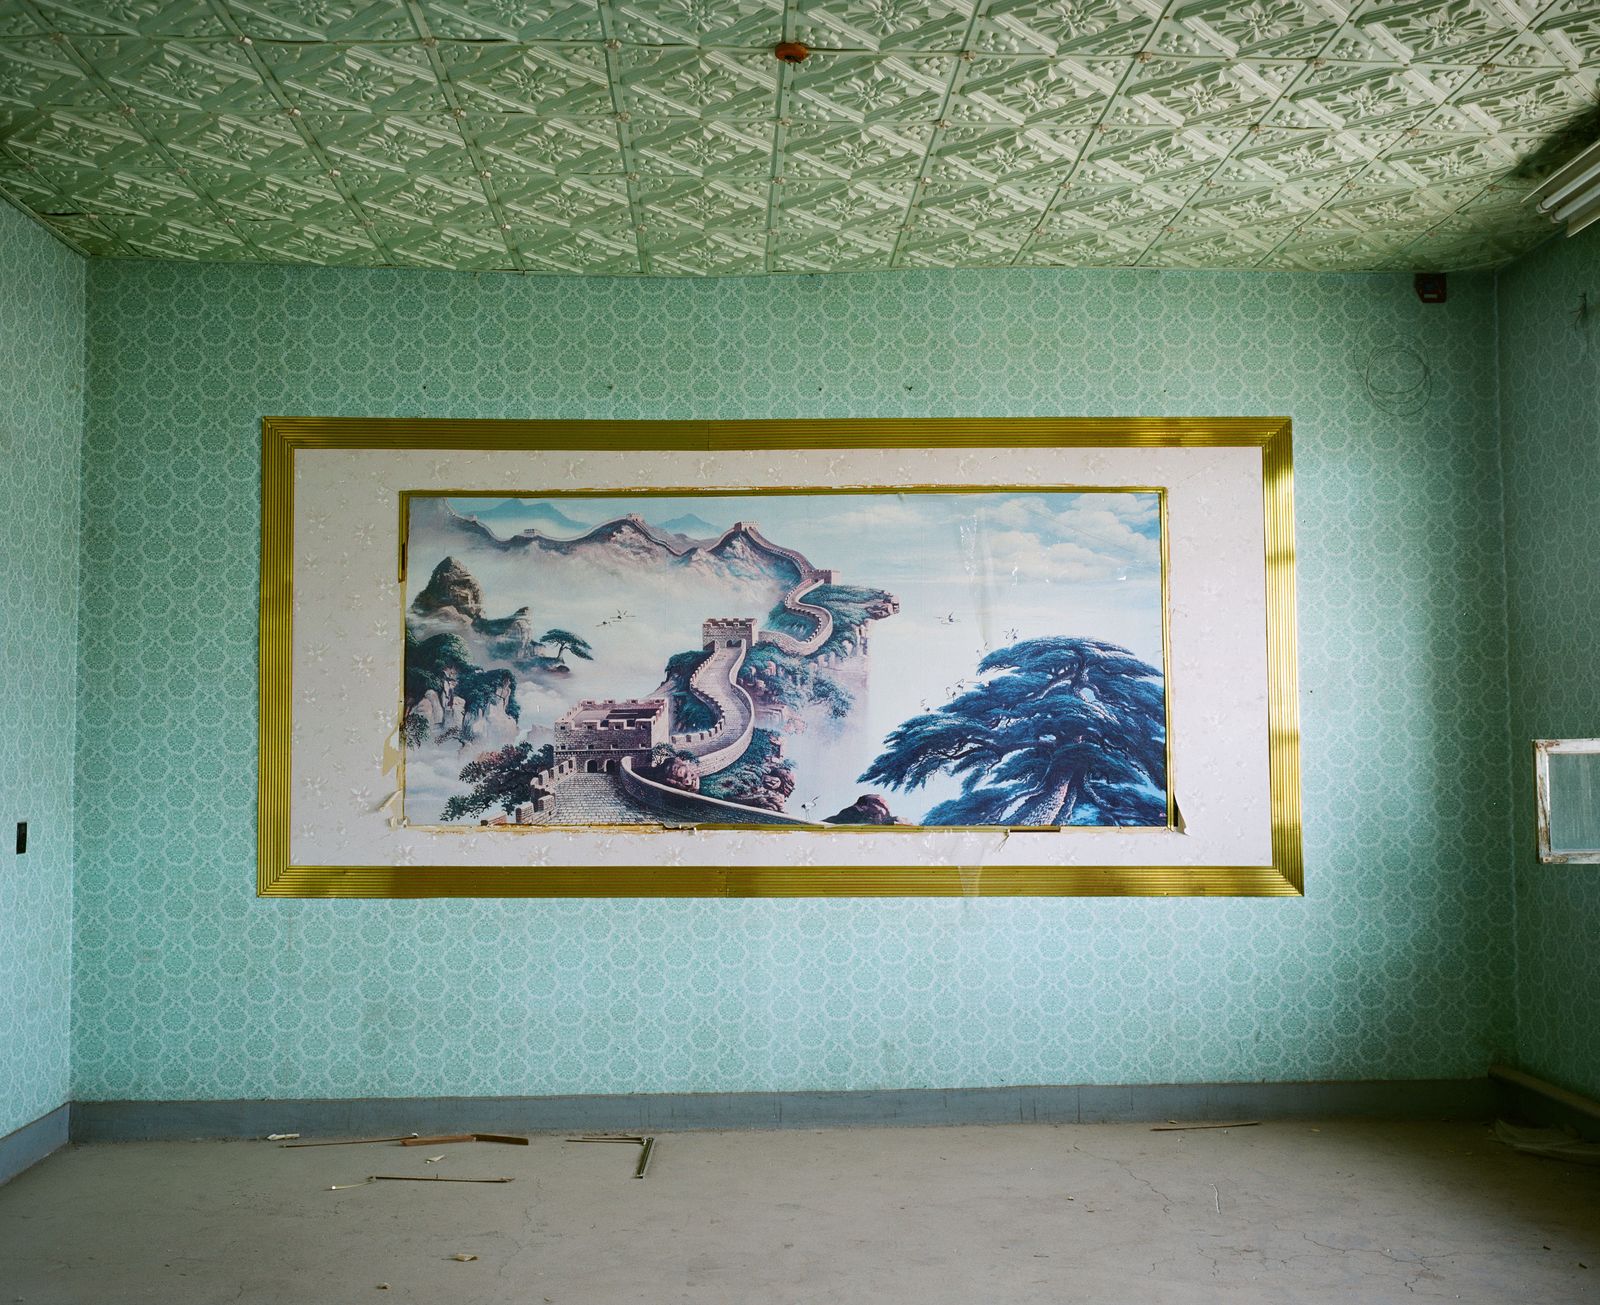 © Pan Wang - April 16, 2018， Yumen City, Gansu Province, China.Decorative paintings in the old city government building.